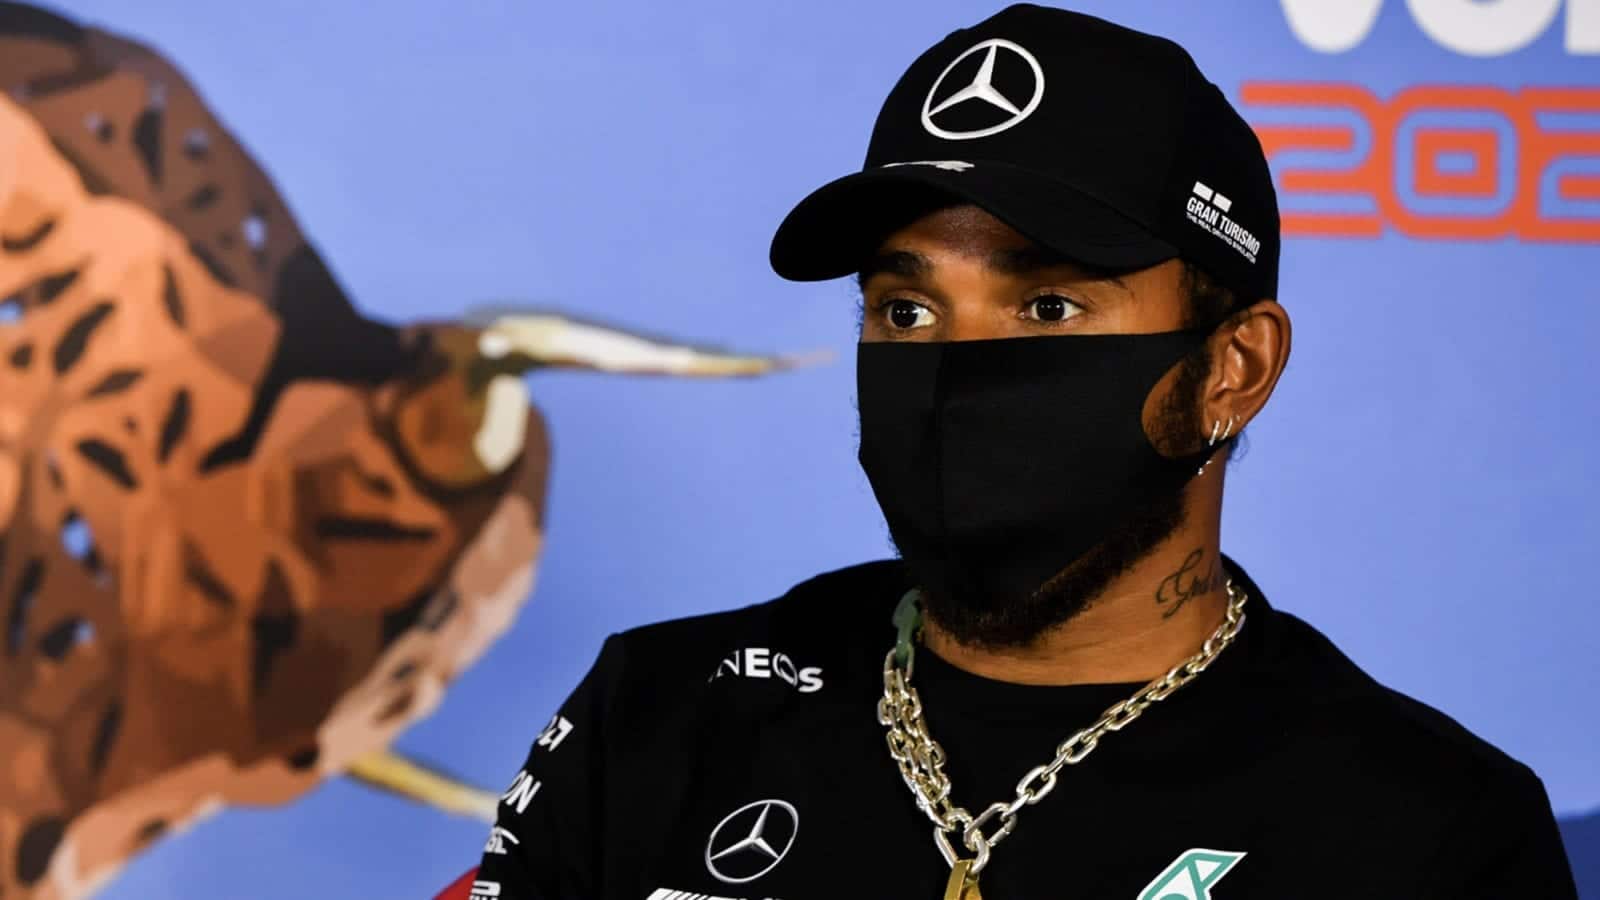 Lewis Hamilton at Thursday press conference ahead of the 2020 F1 Austrian Grand Prix